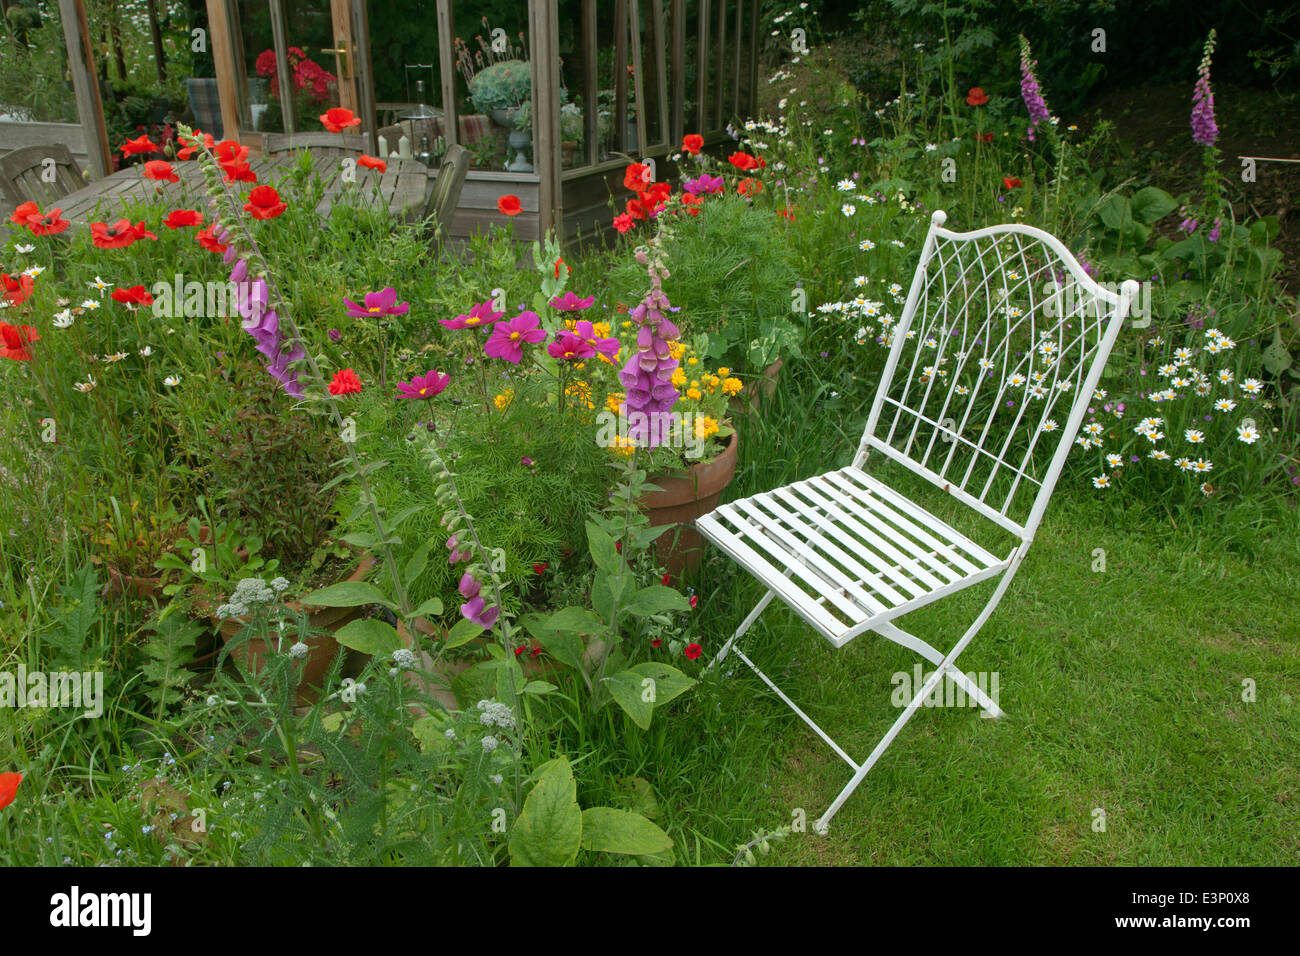 Pretty garden flowers and garden seat with trug and implements Stock Photo